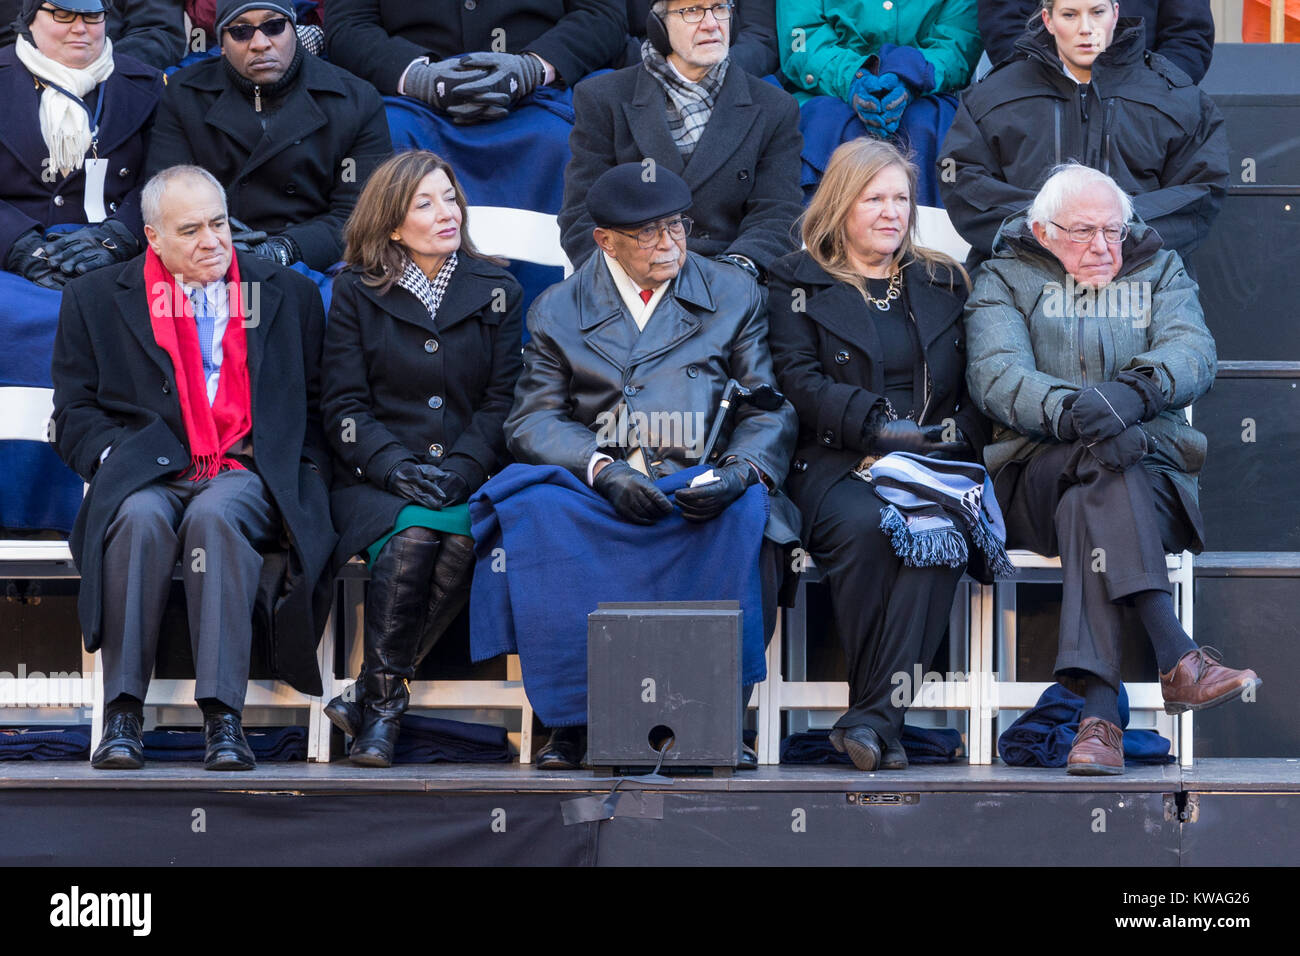 New York, USA. 1st Jan, 2018. Thomas DiNapoli, Kathy Hochul, David Dinkins, Jane Sanders, Bernie Sanders attend inauguration for Public Advocate, Comptroller, mayor in frigid weather in front of City Hall Credit: lev radin/Alamy Live News Stock Photo